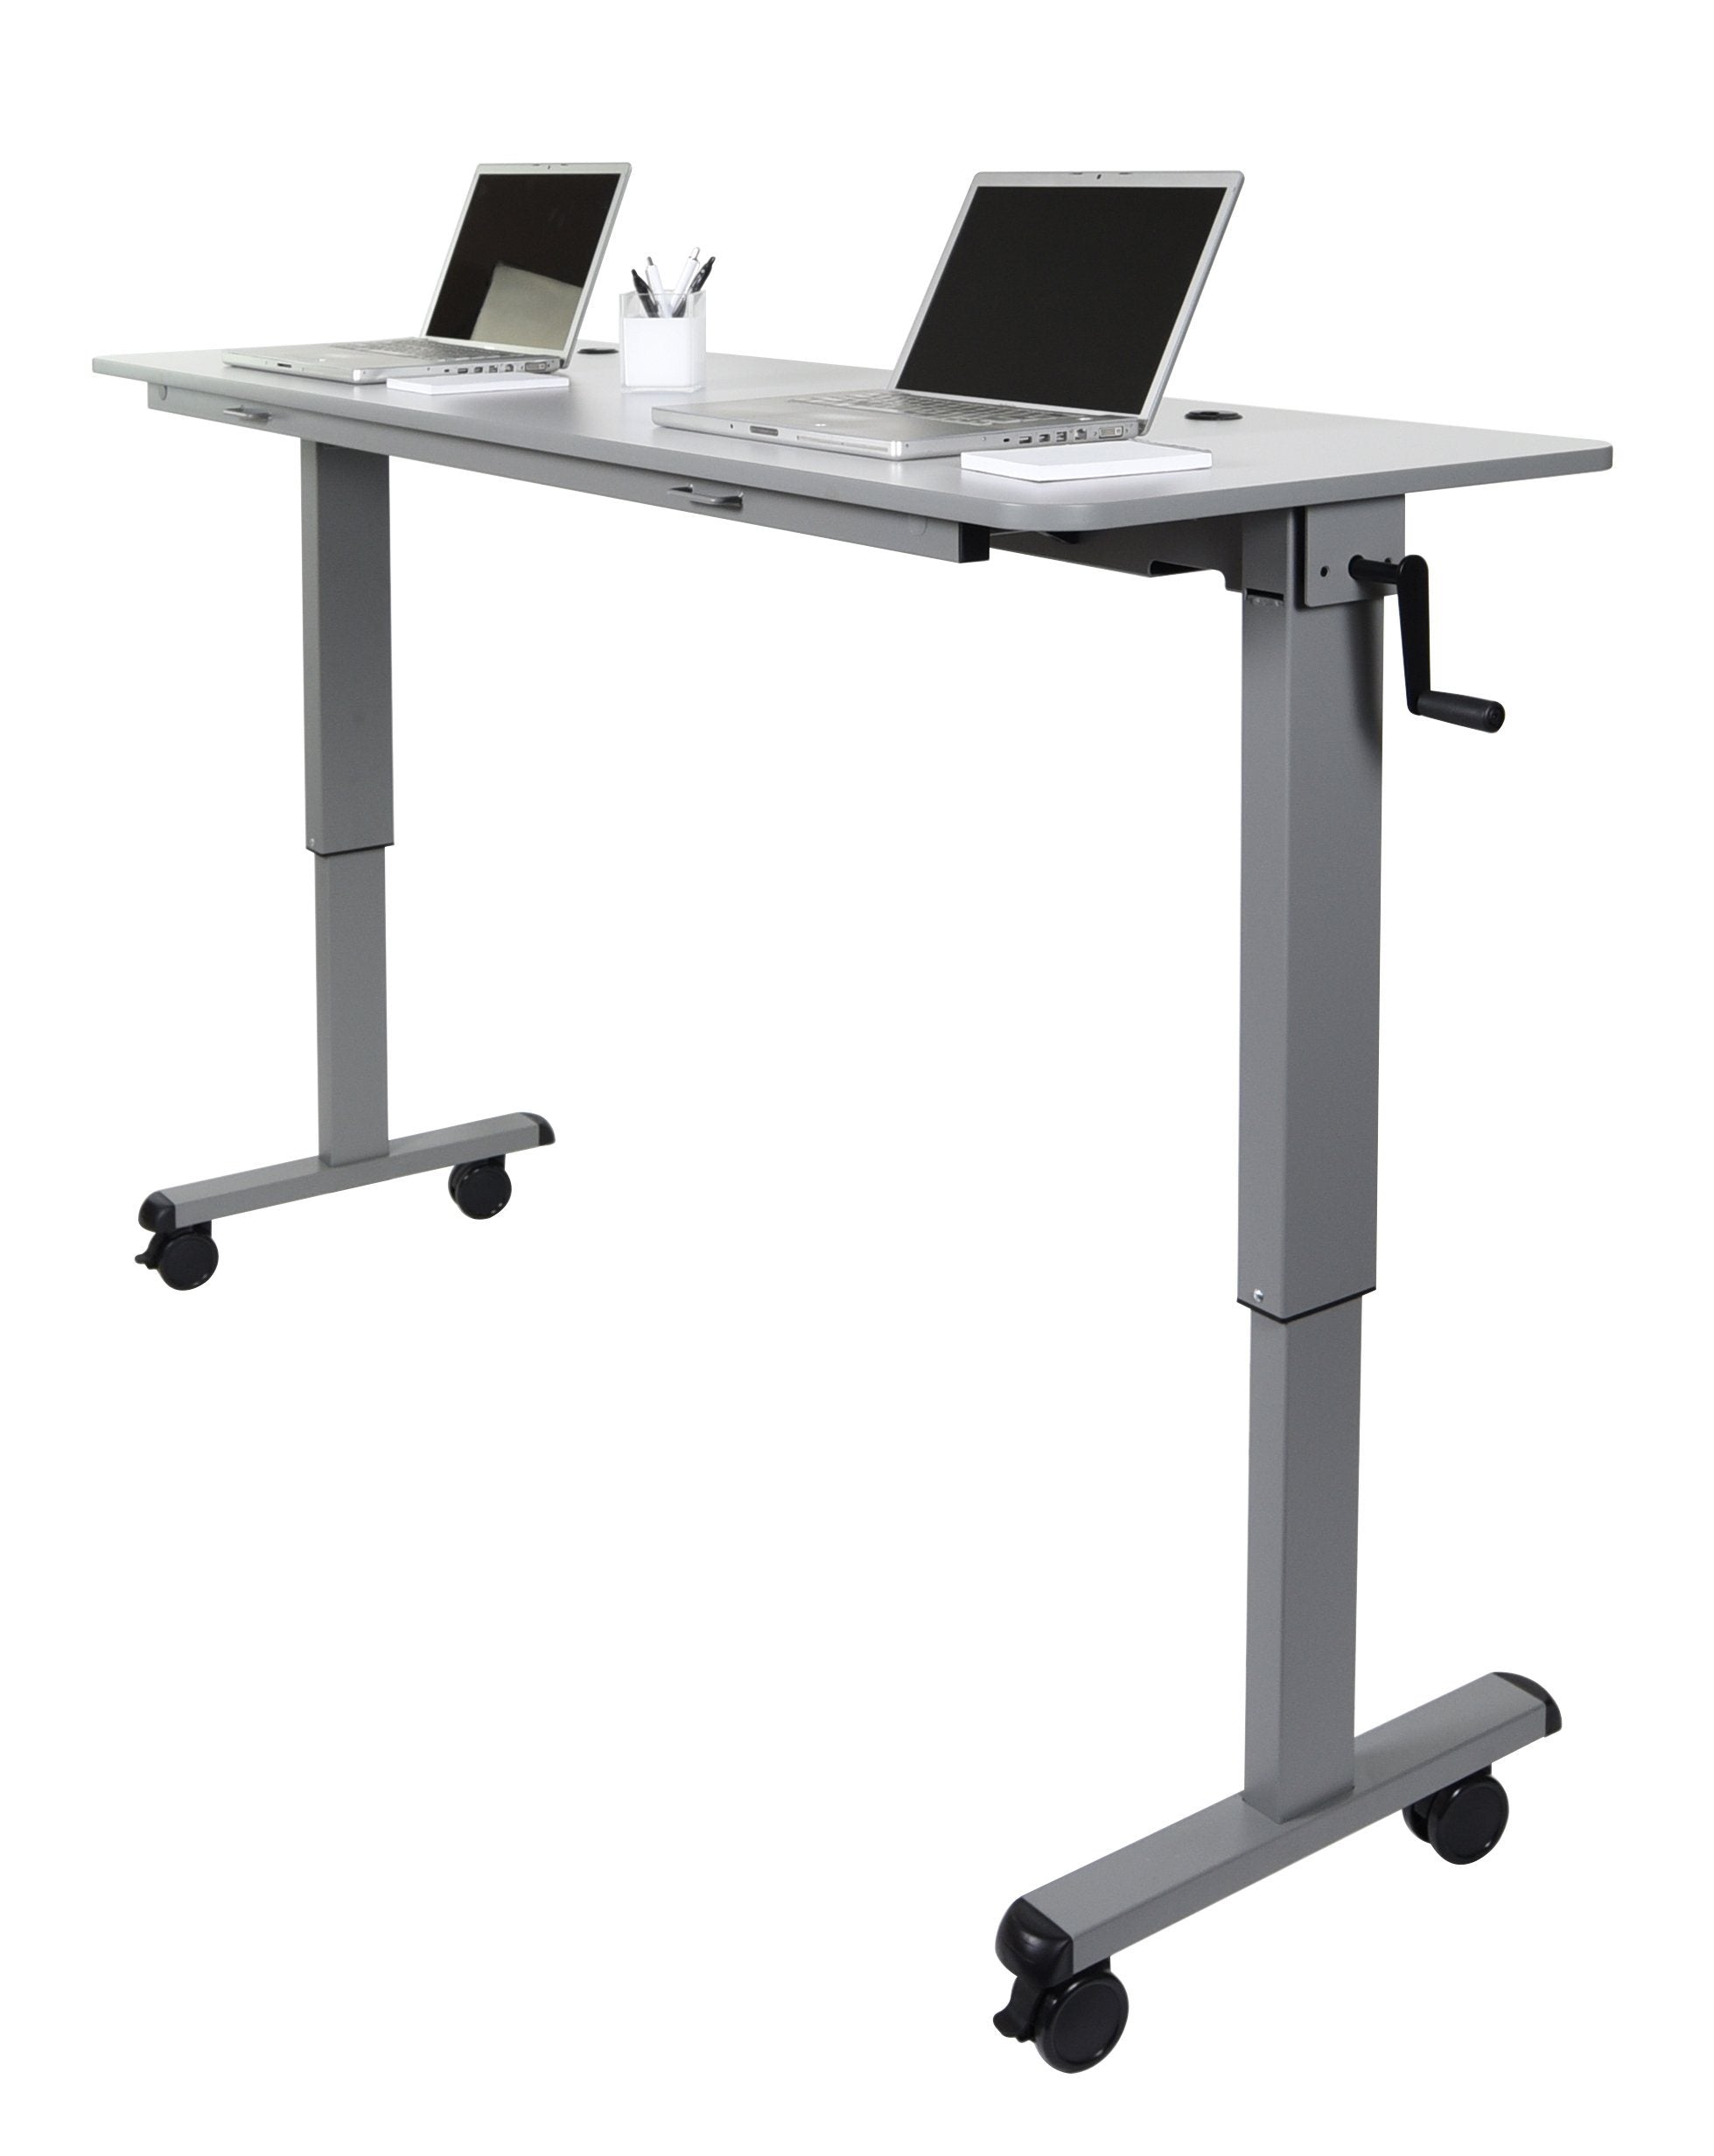 Luxor STAND-NESTC-60 Is A 60" Adjustable Flip Top Table Wih A Crank Handle